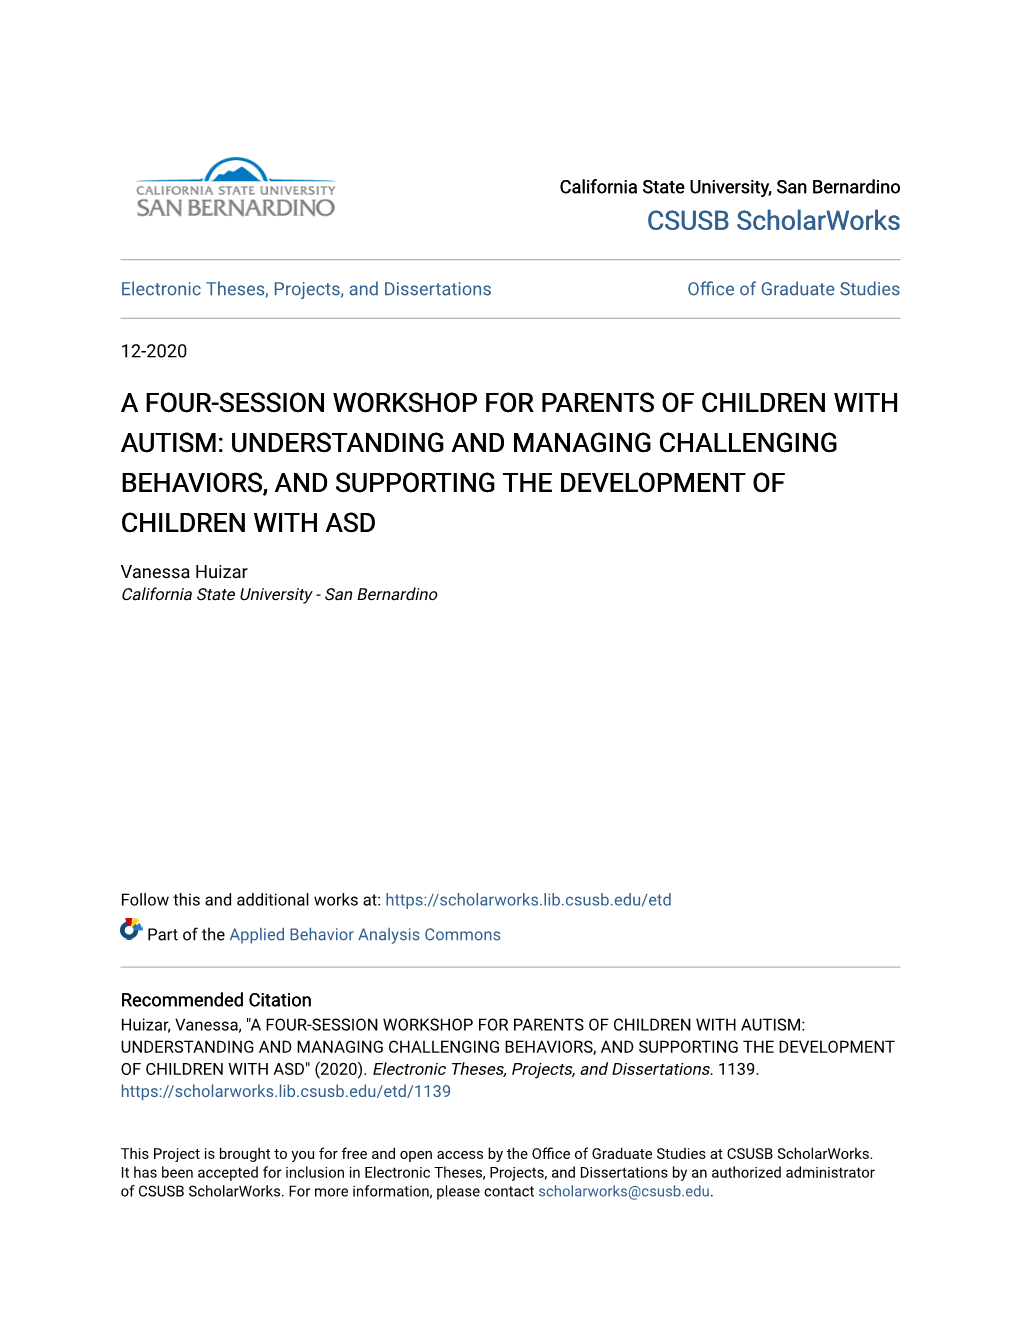 A Four-Session Workshop for Parents of Children with Autism: Understanding and Managing Challenging Behaviors, and Supporting the Development of Children with Asd